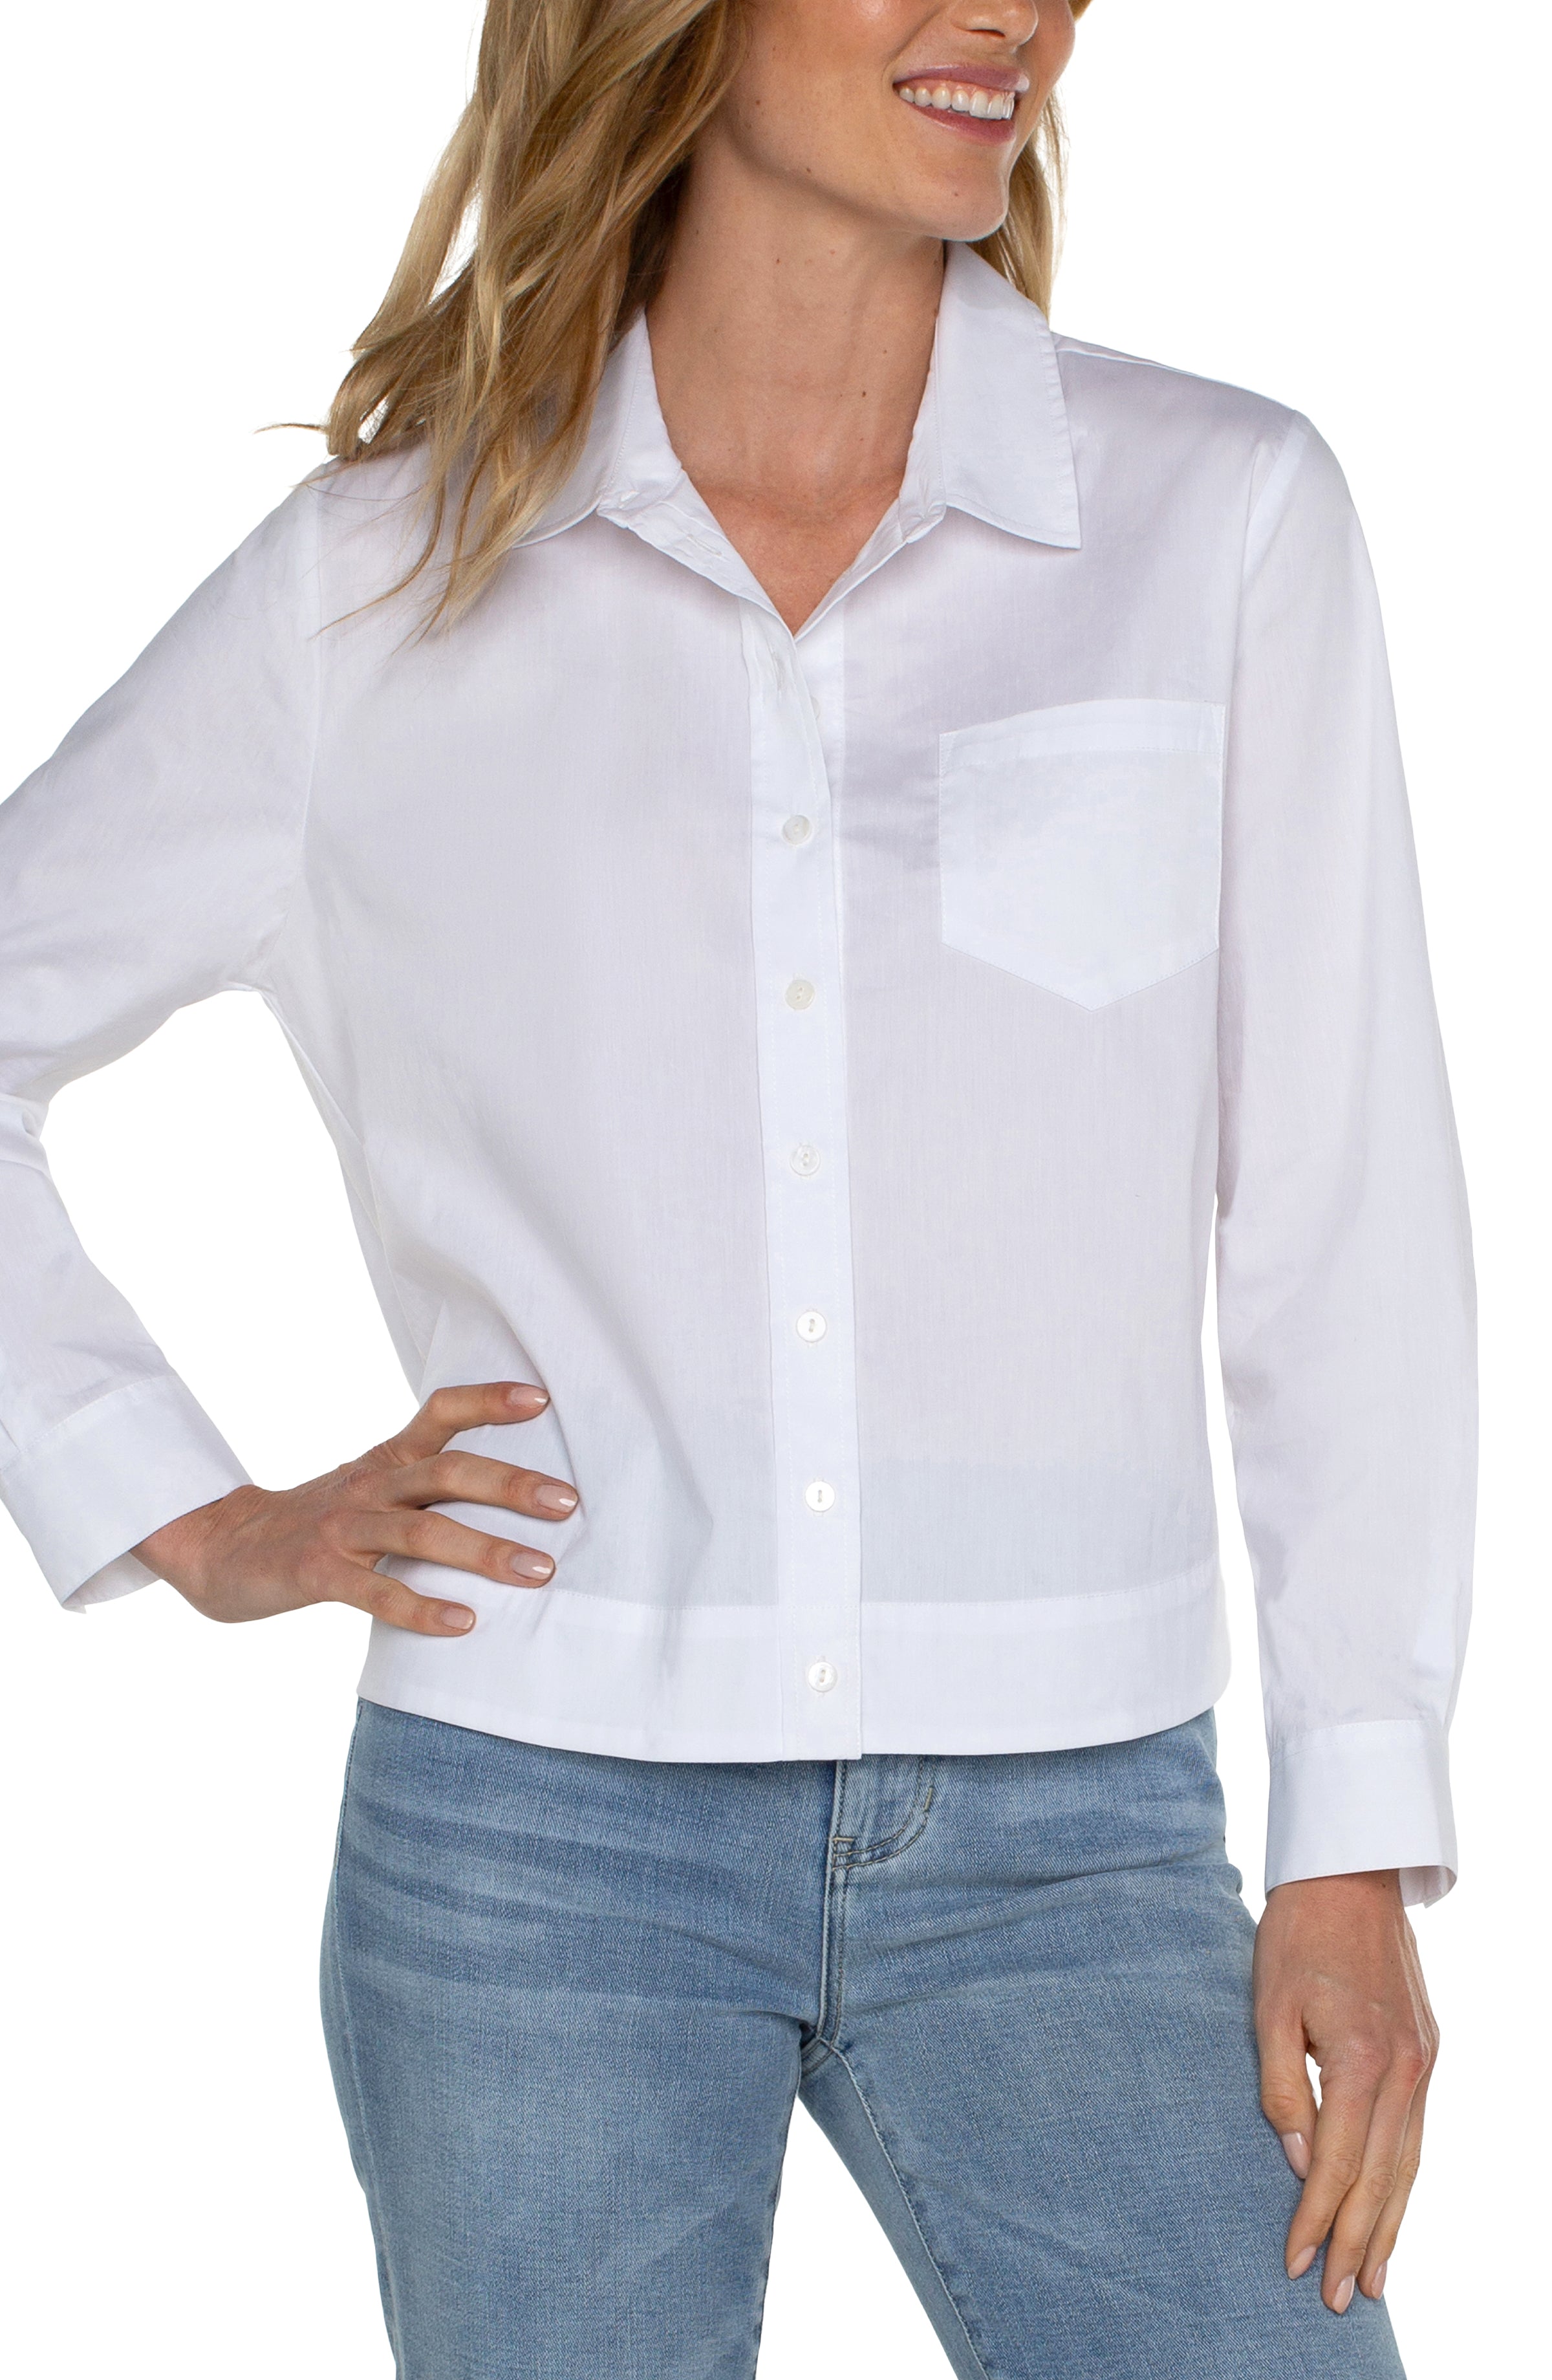 LPLA White Button Front Banded Shirt